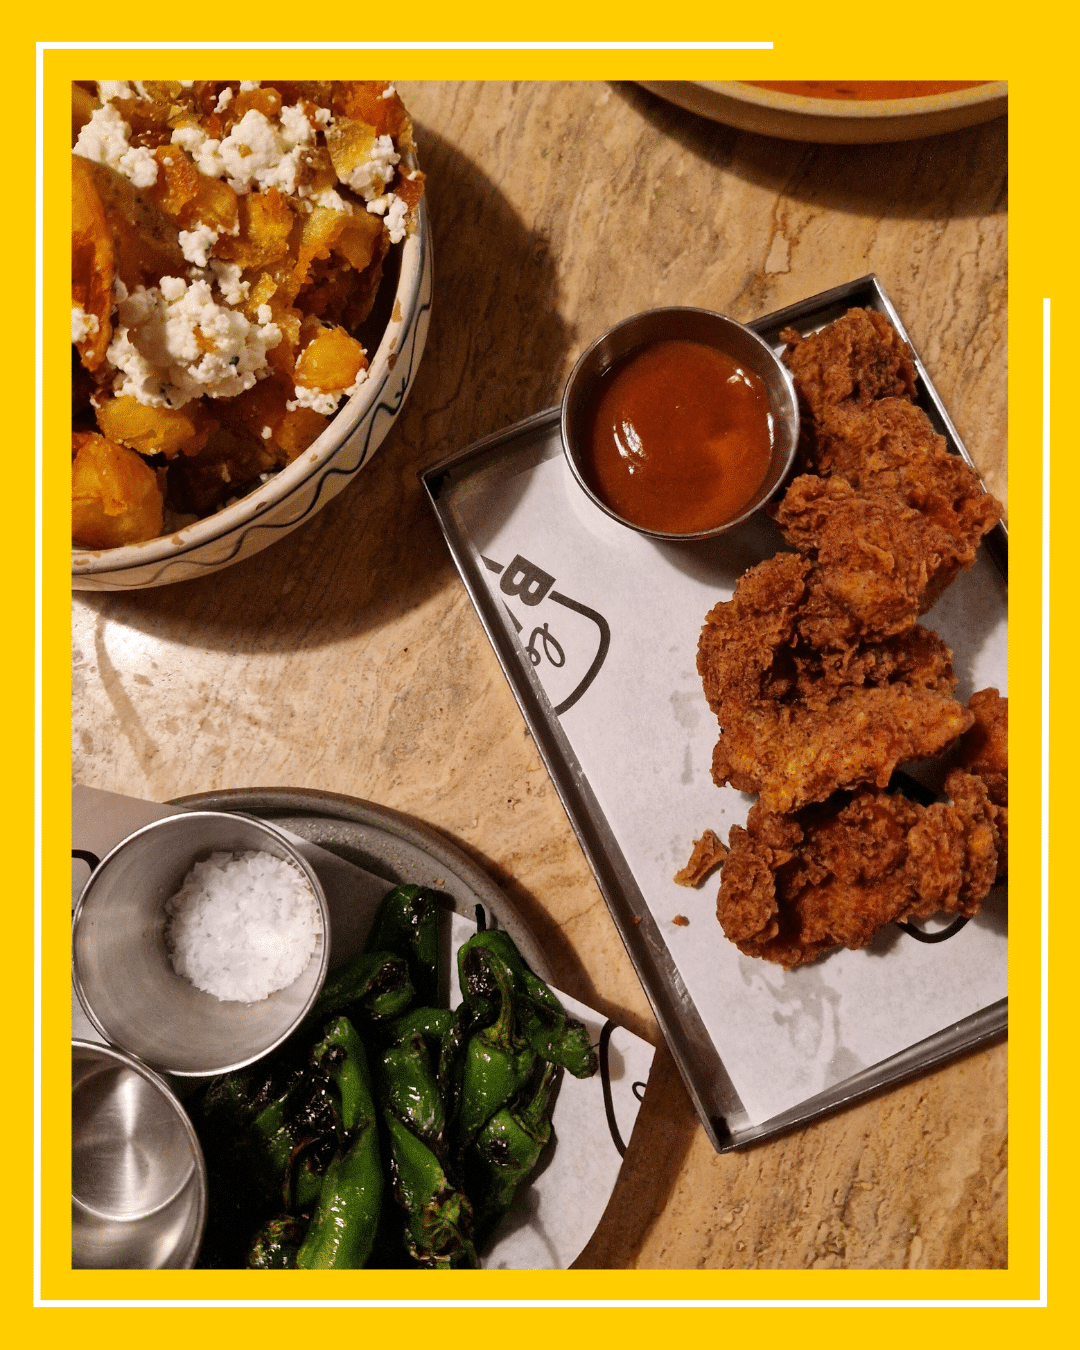 LBFC - fried chicken, și padron peppers